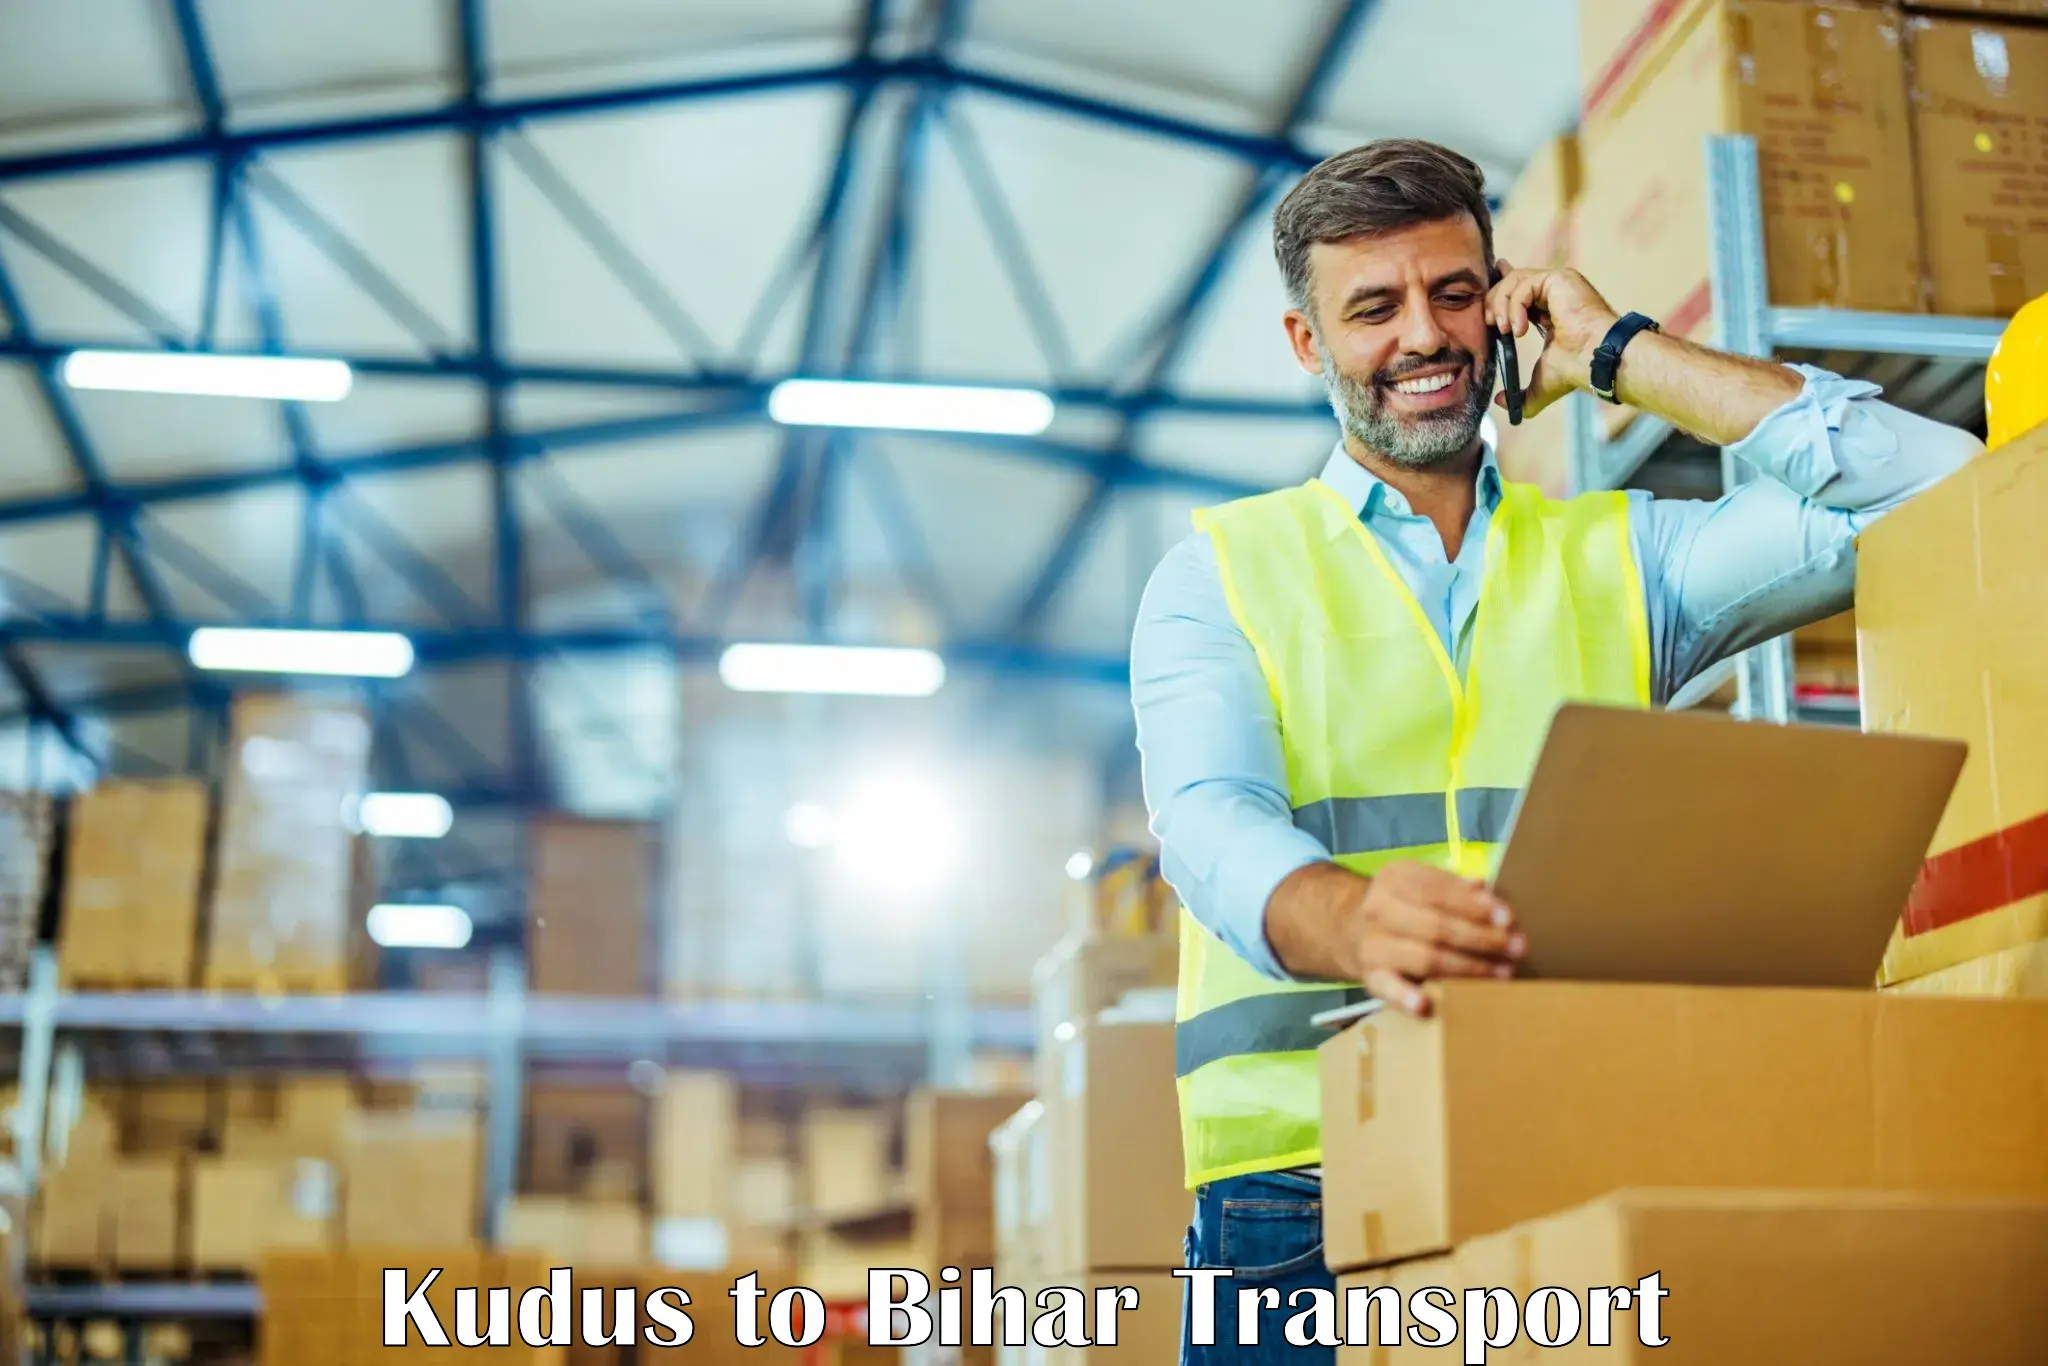 Nationwide transport services Kudus to Rajpur